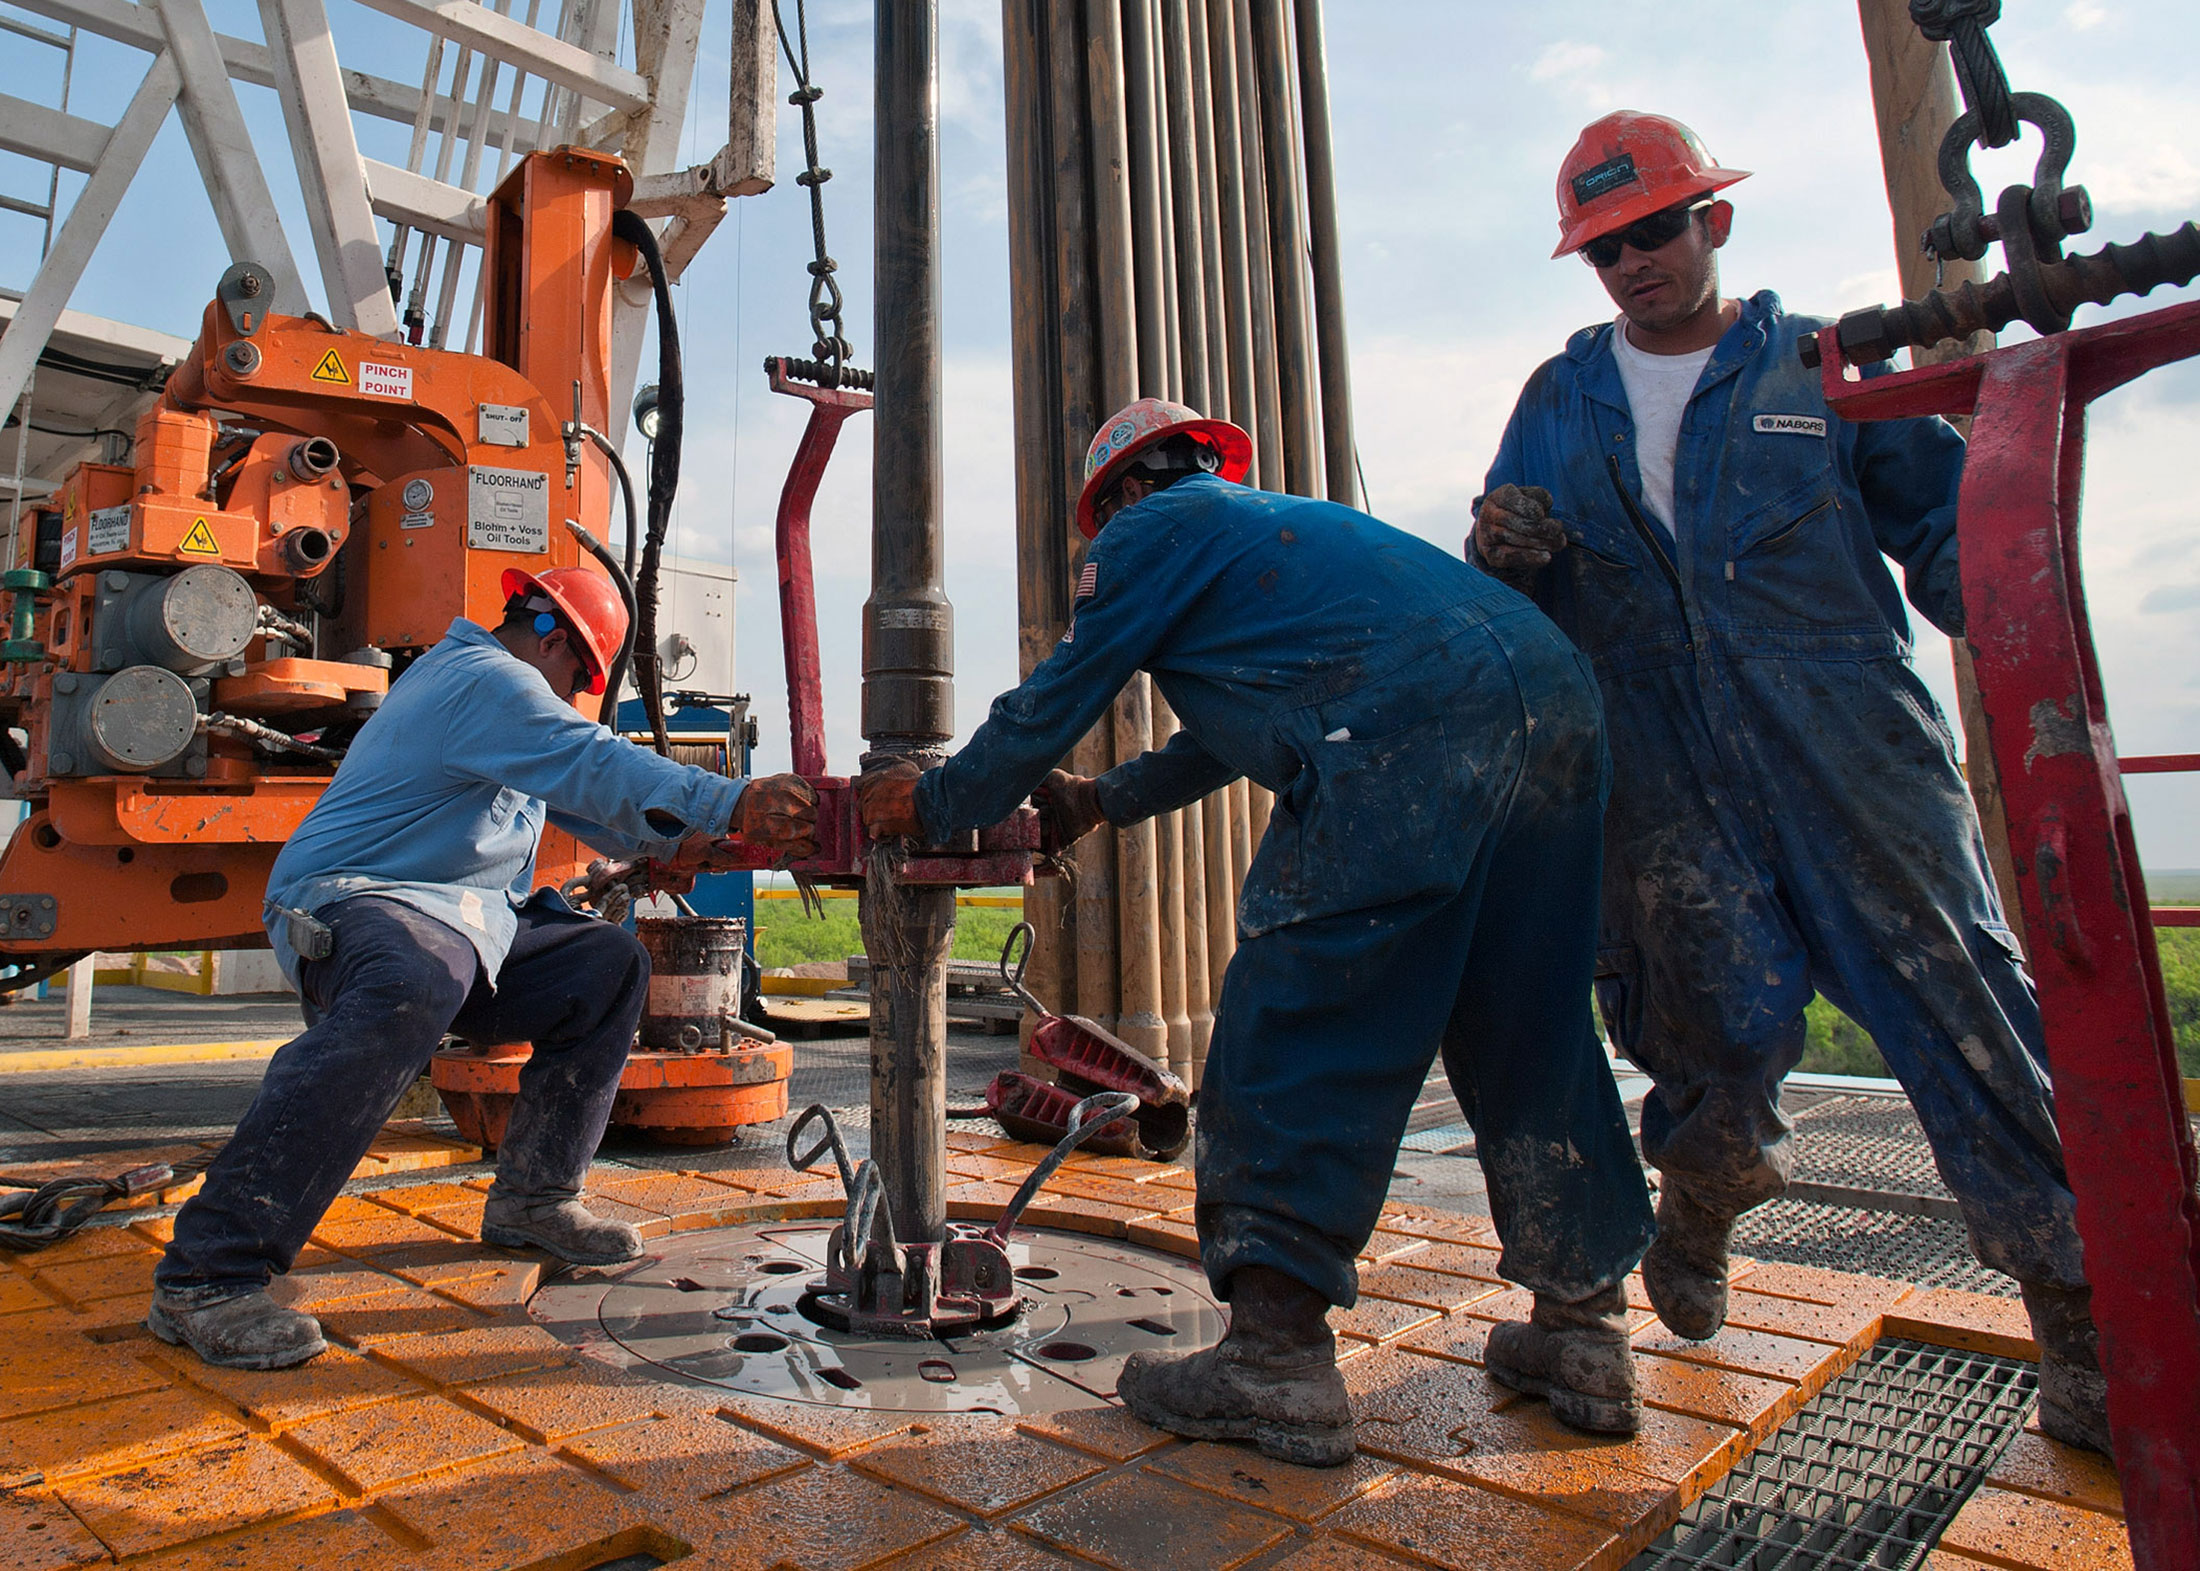 Wall Street Lenders Growing Impatient With U.S. Shale Revolution - Bloomberg2200 x 1571